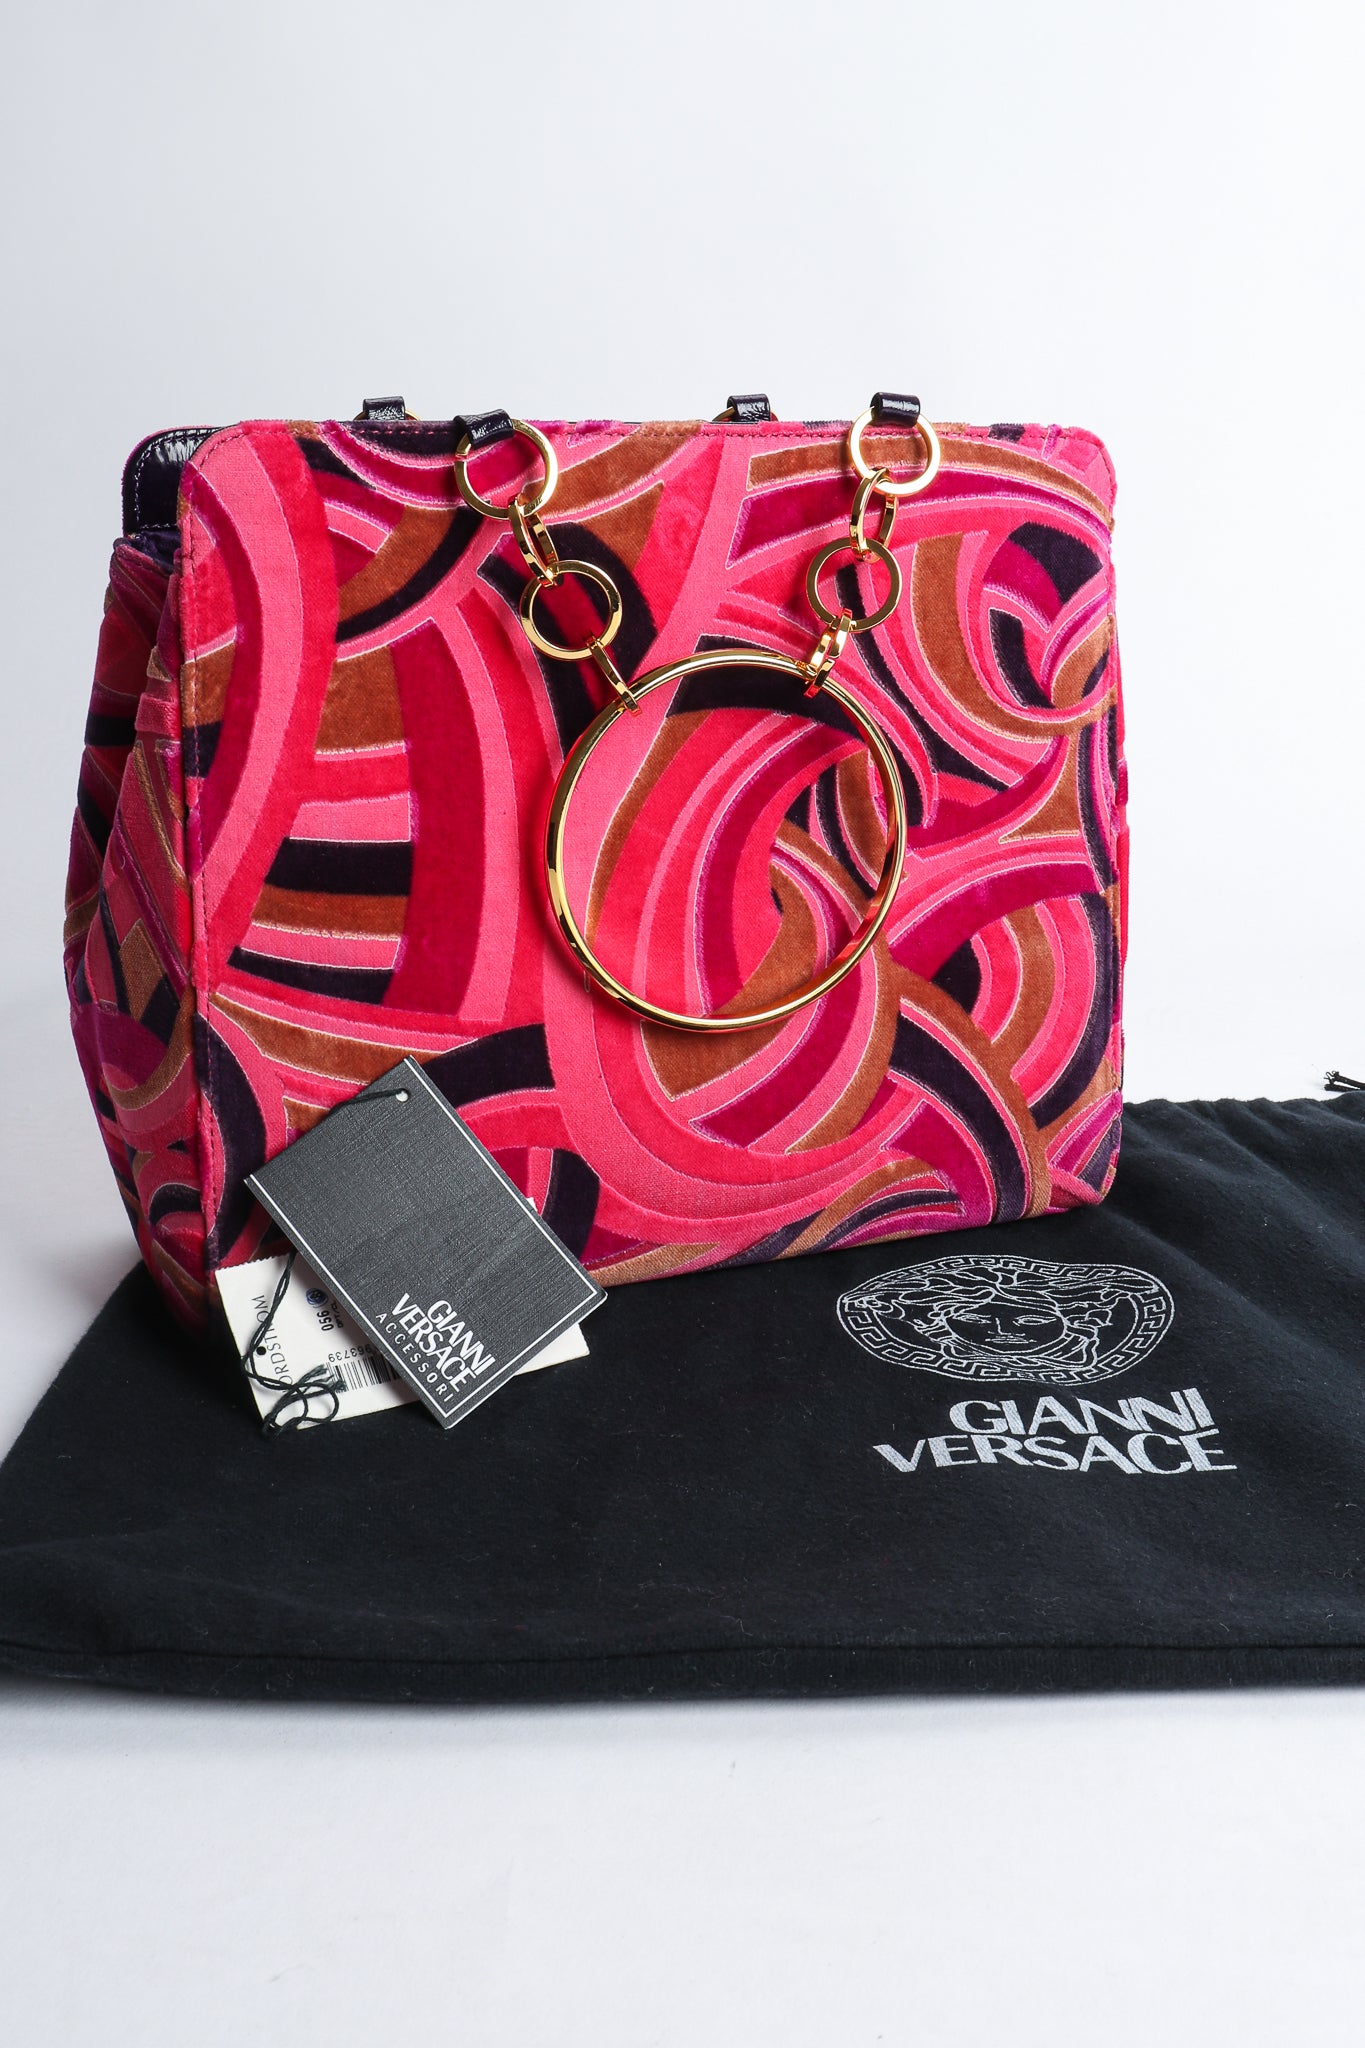 Vintage Gianni Versace Velvet Swirl O-Ring Bag with dustbag at Recess Los Angeles